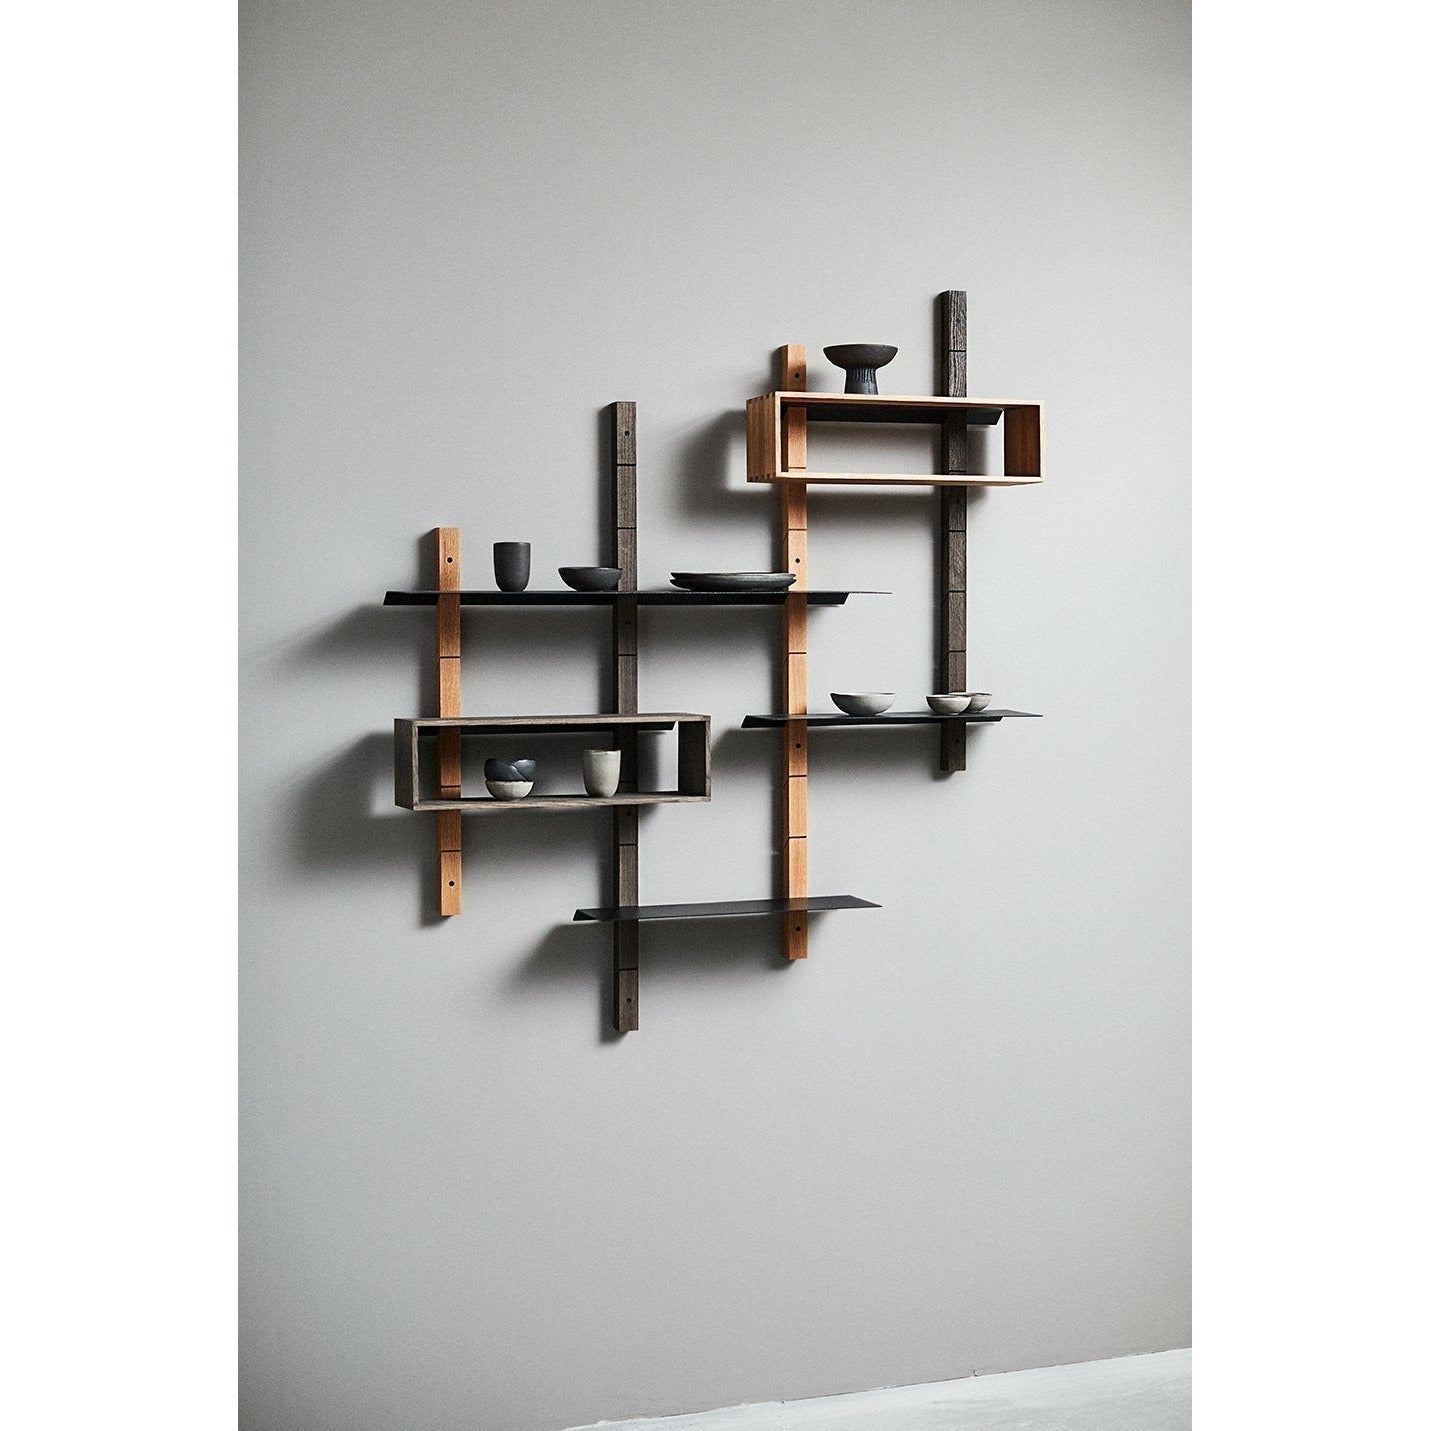 Muubs Oaks Shelving System Stained Oak, 120cm